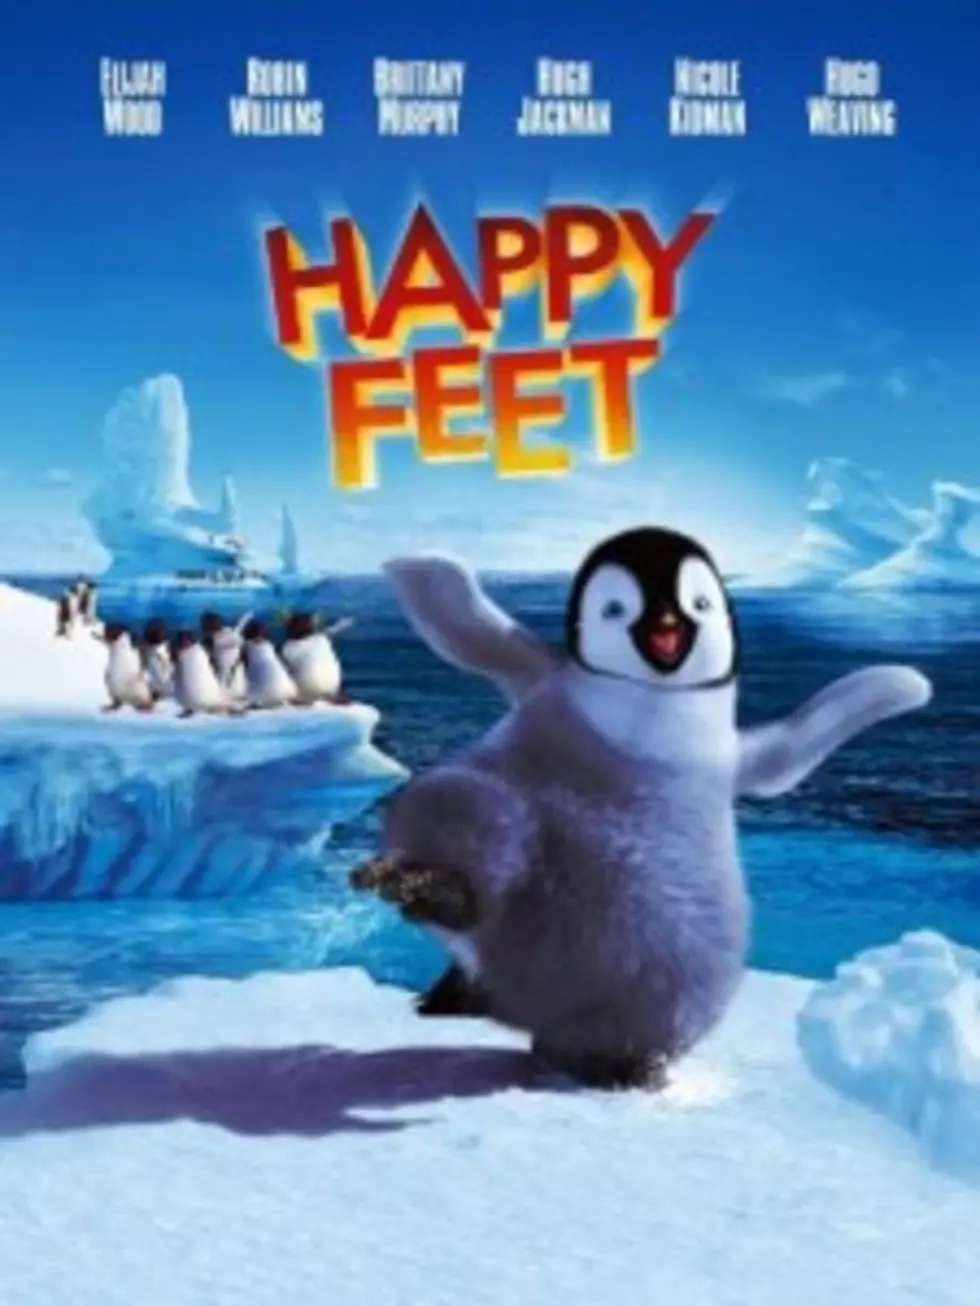 Friday&#8217;s Free Downtown Movie Night Features &#8220;Happy Feet&#8221;